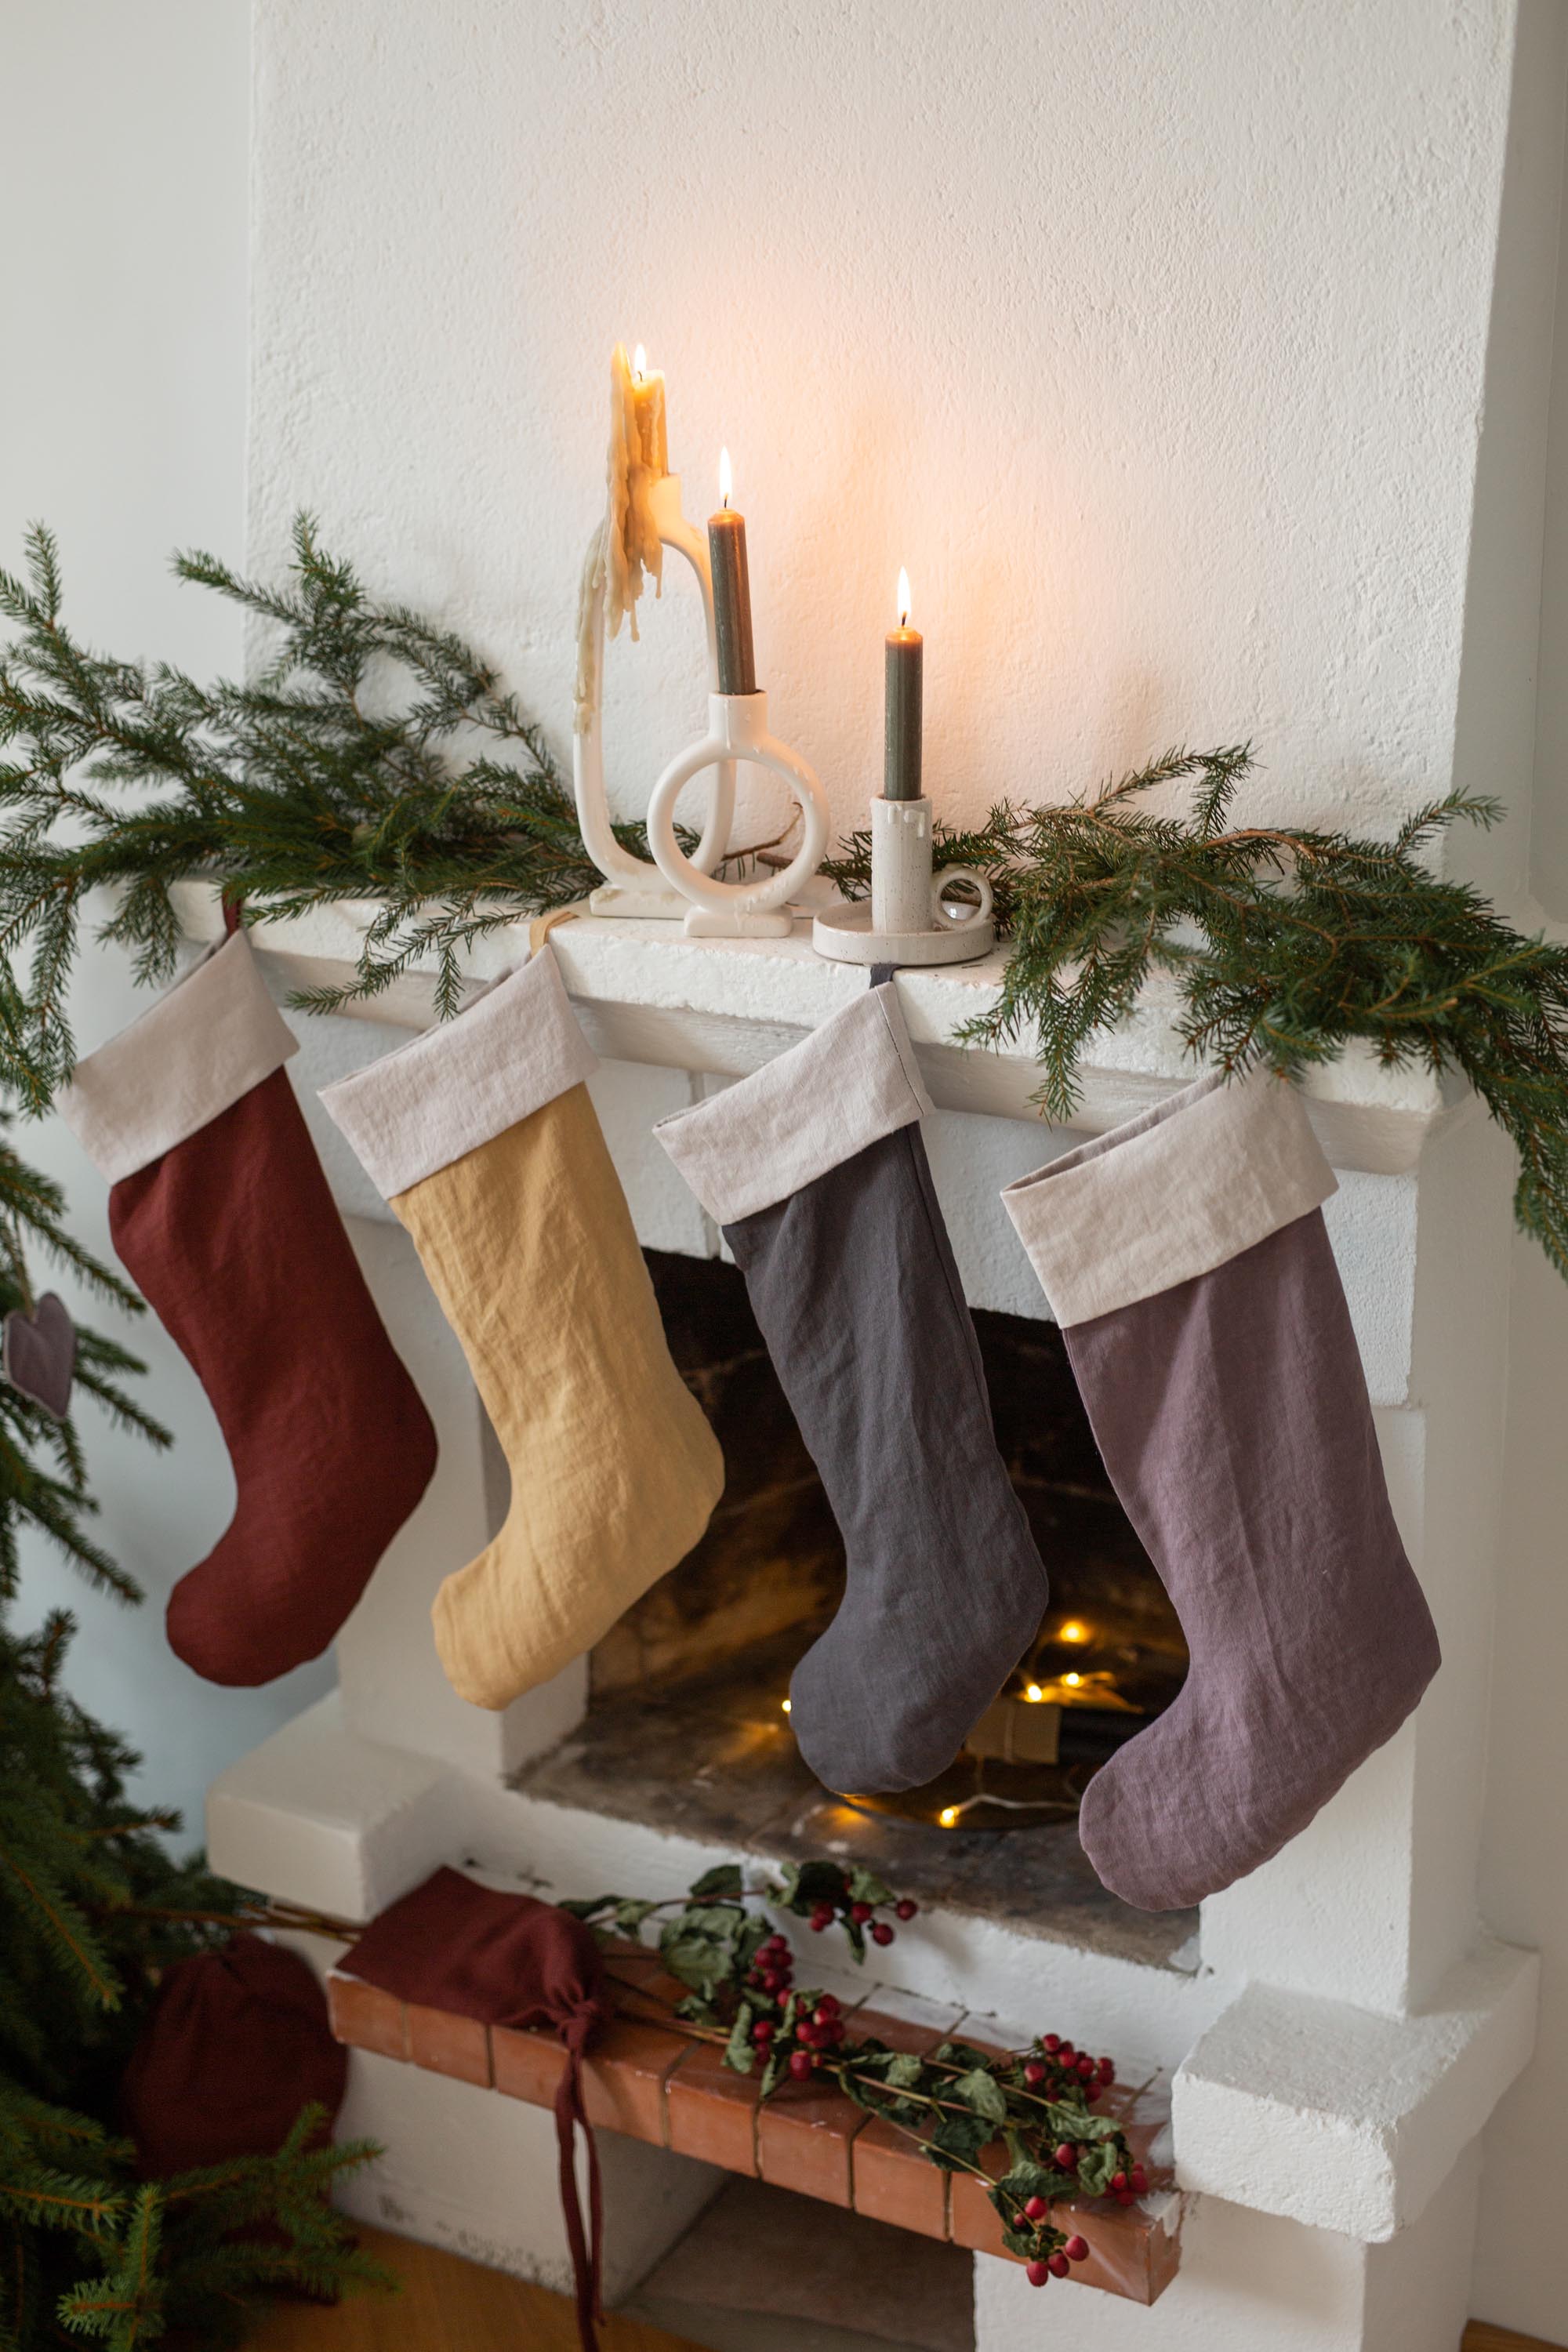 Different Color Christmas Stockings By AmourlInen